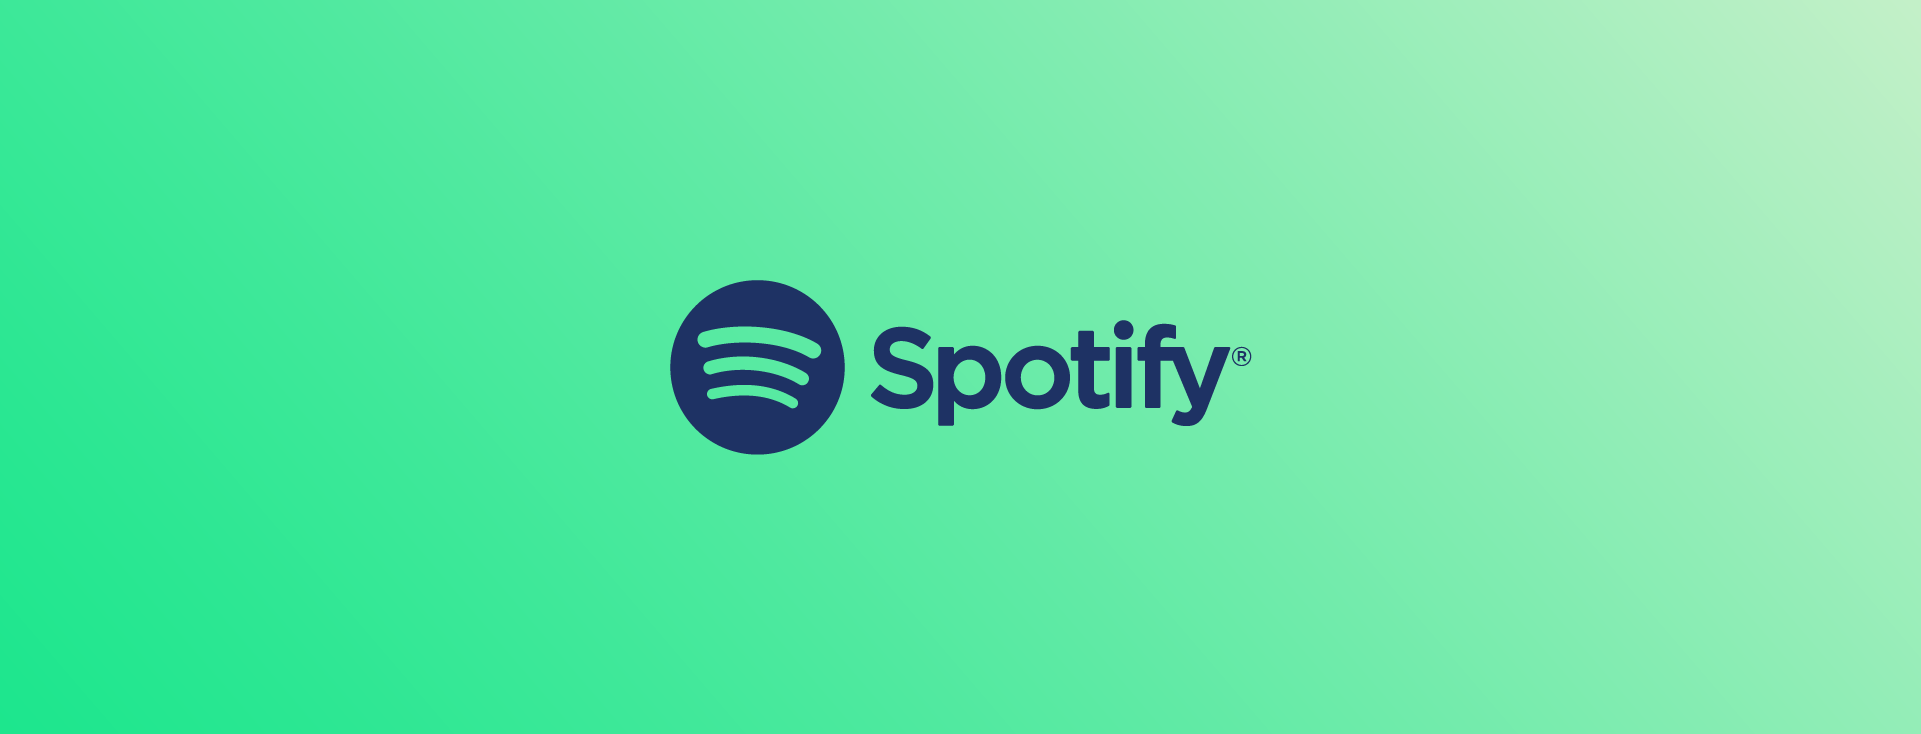 Can I merge two Spotify accounts?